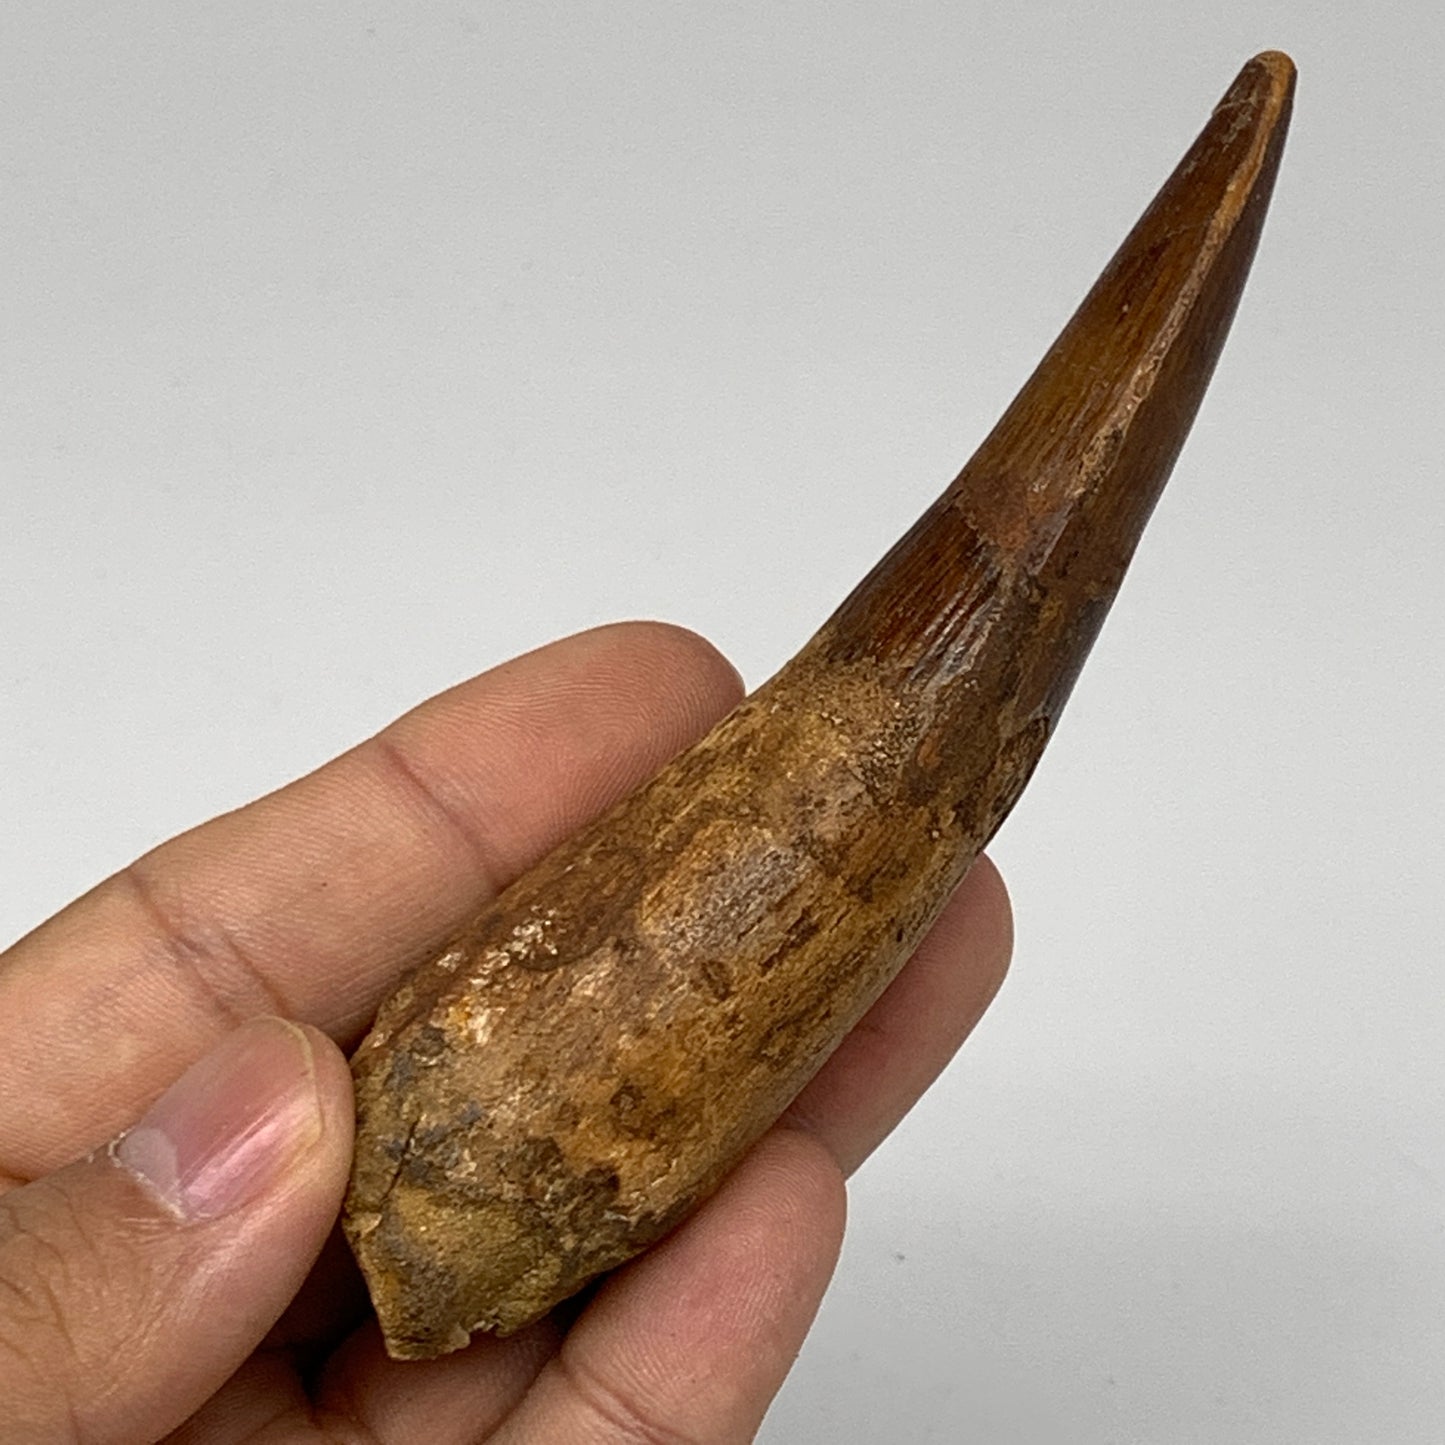 58.3g, 4.2"X1.2"x 1", Rare Natural Fossils Spinosaurus Tooth from Morocco, F3161